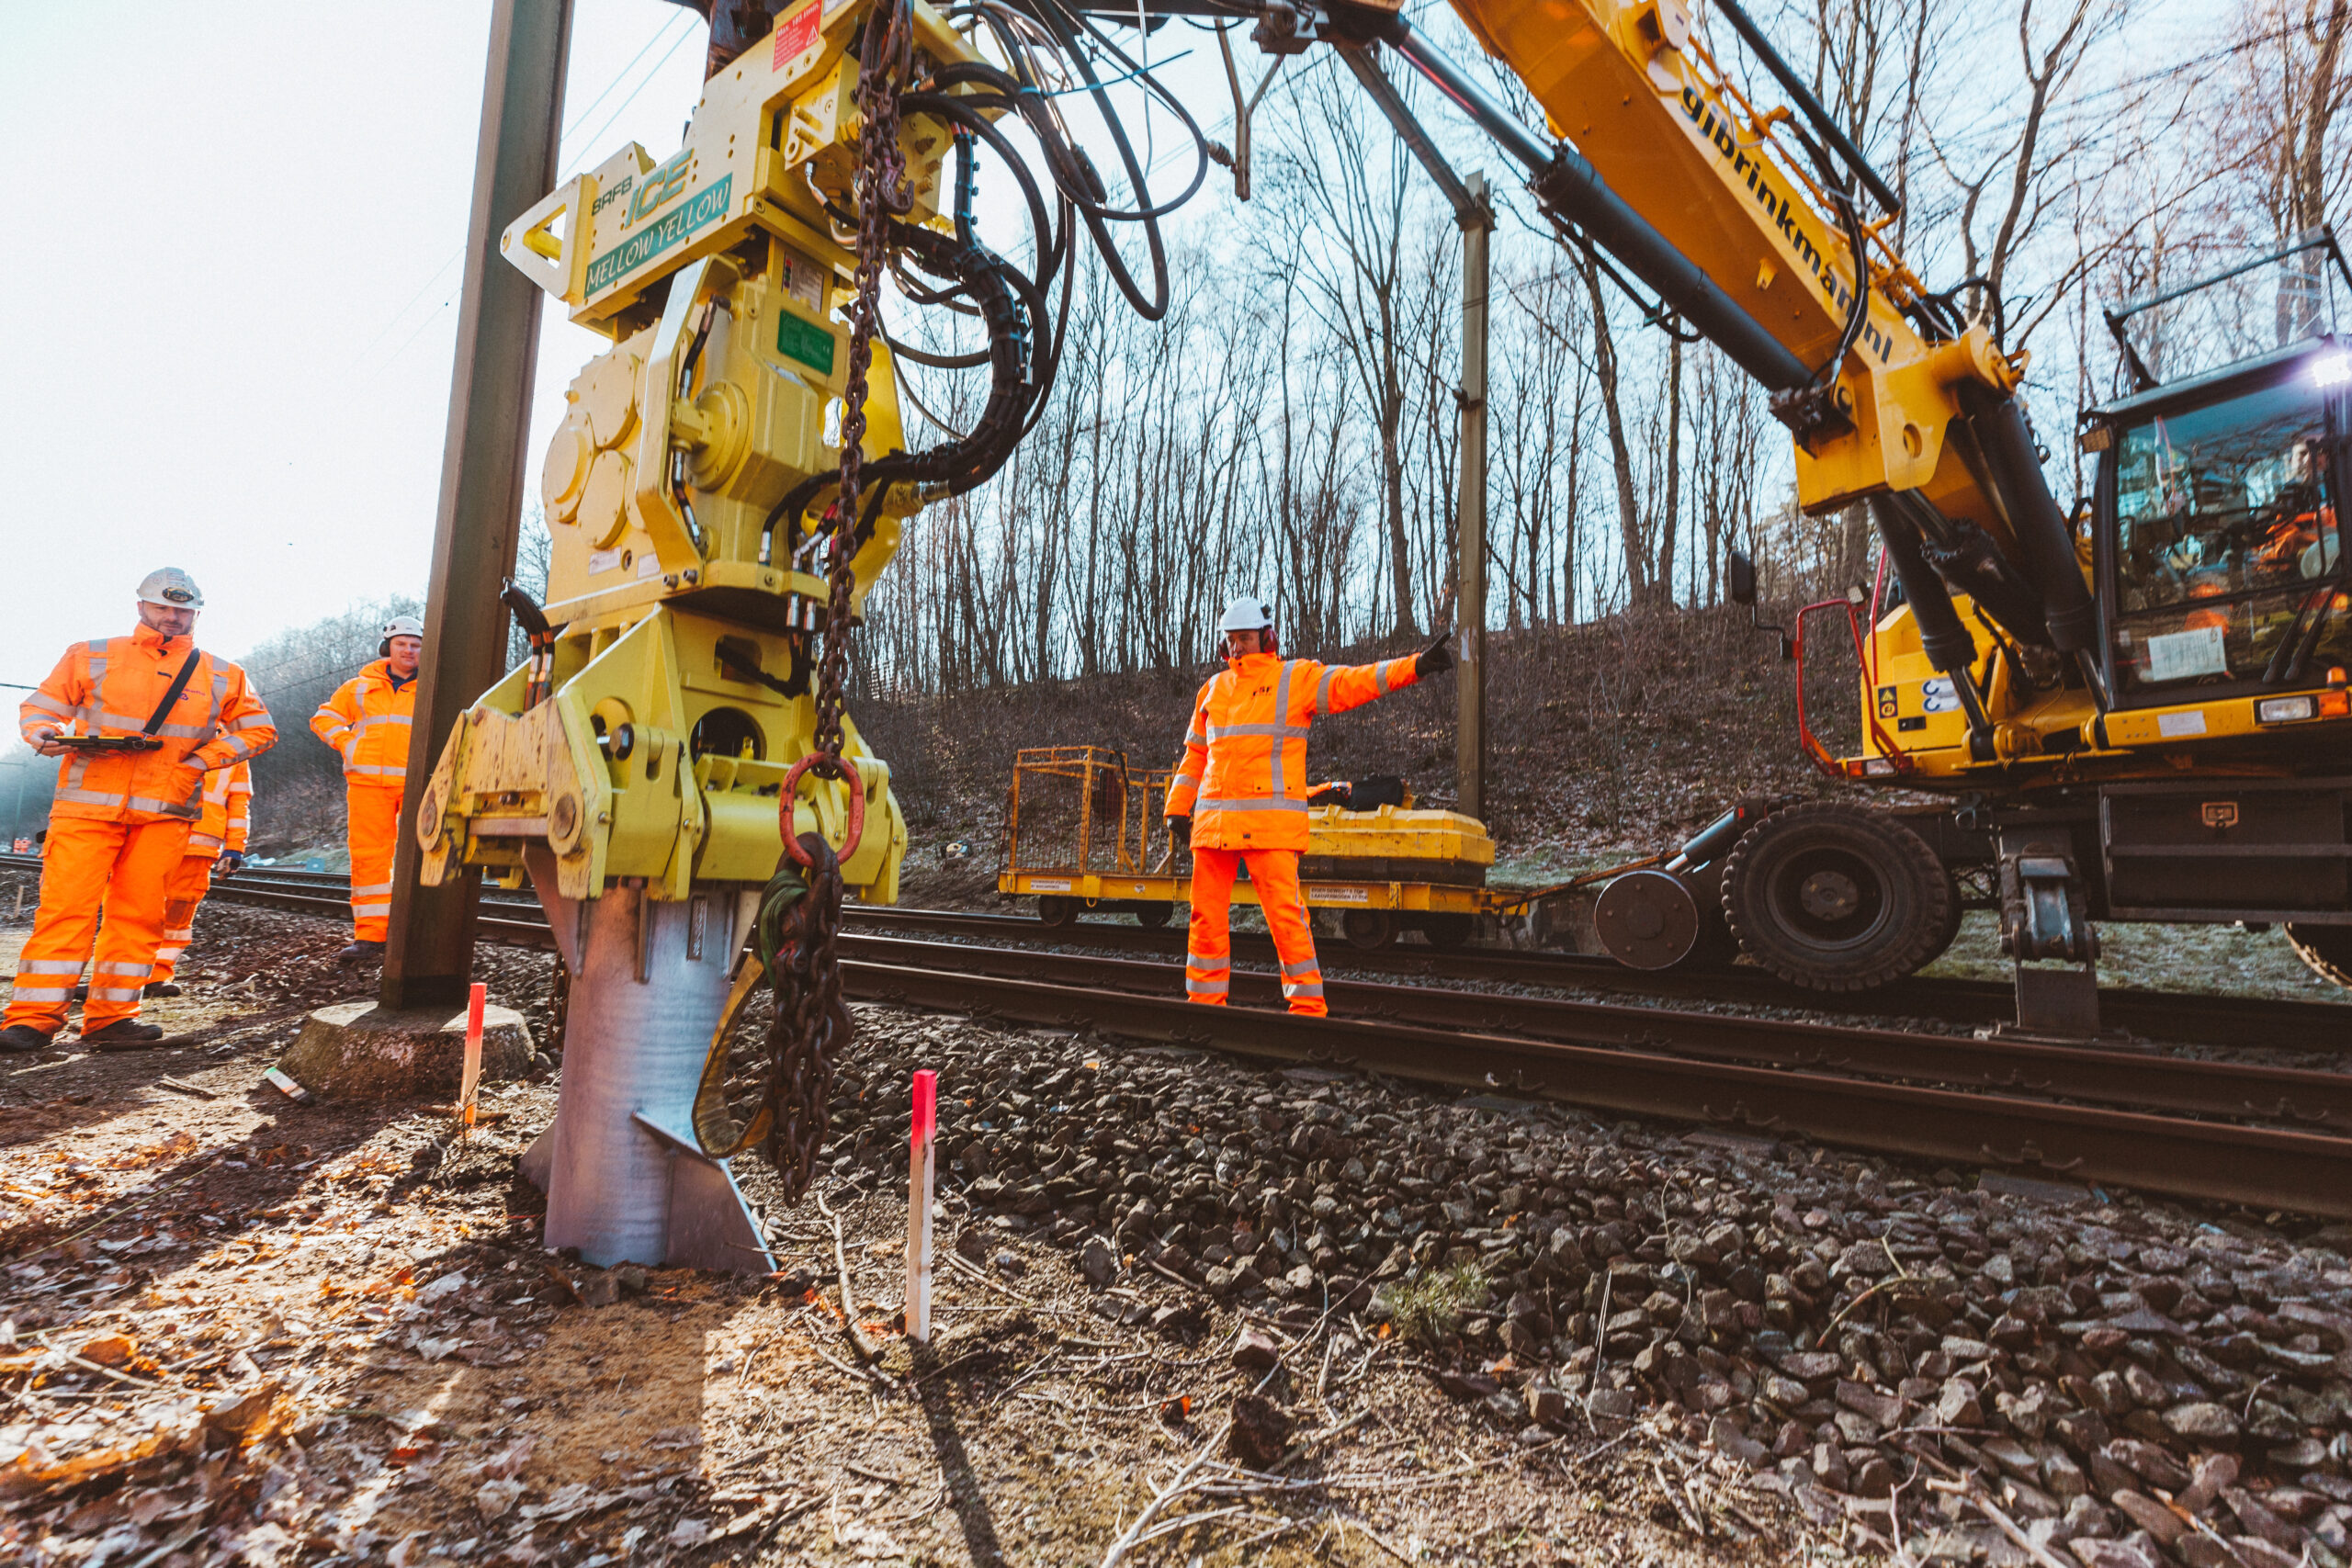 Installation of GS-foundations by GSF Rail Infra using their high frequency vibration tool and a road-rail excavator